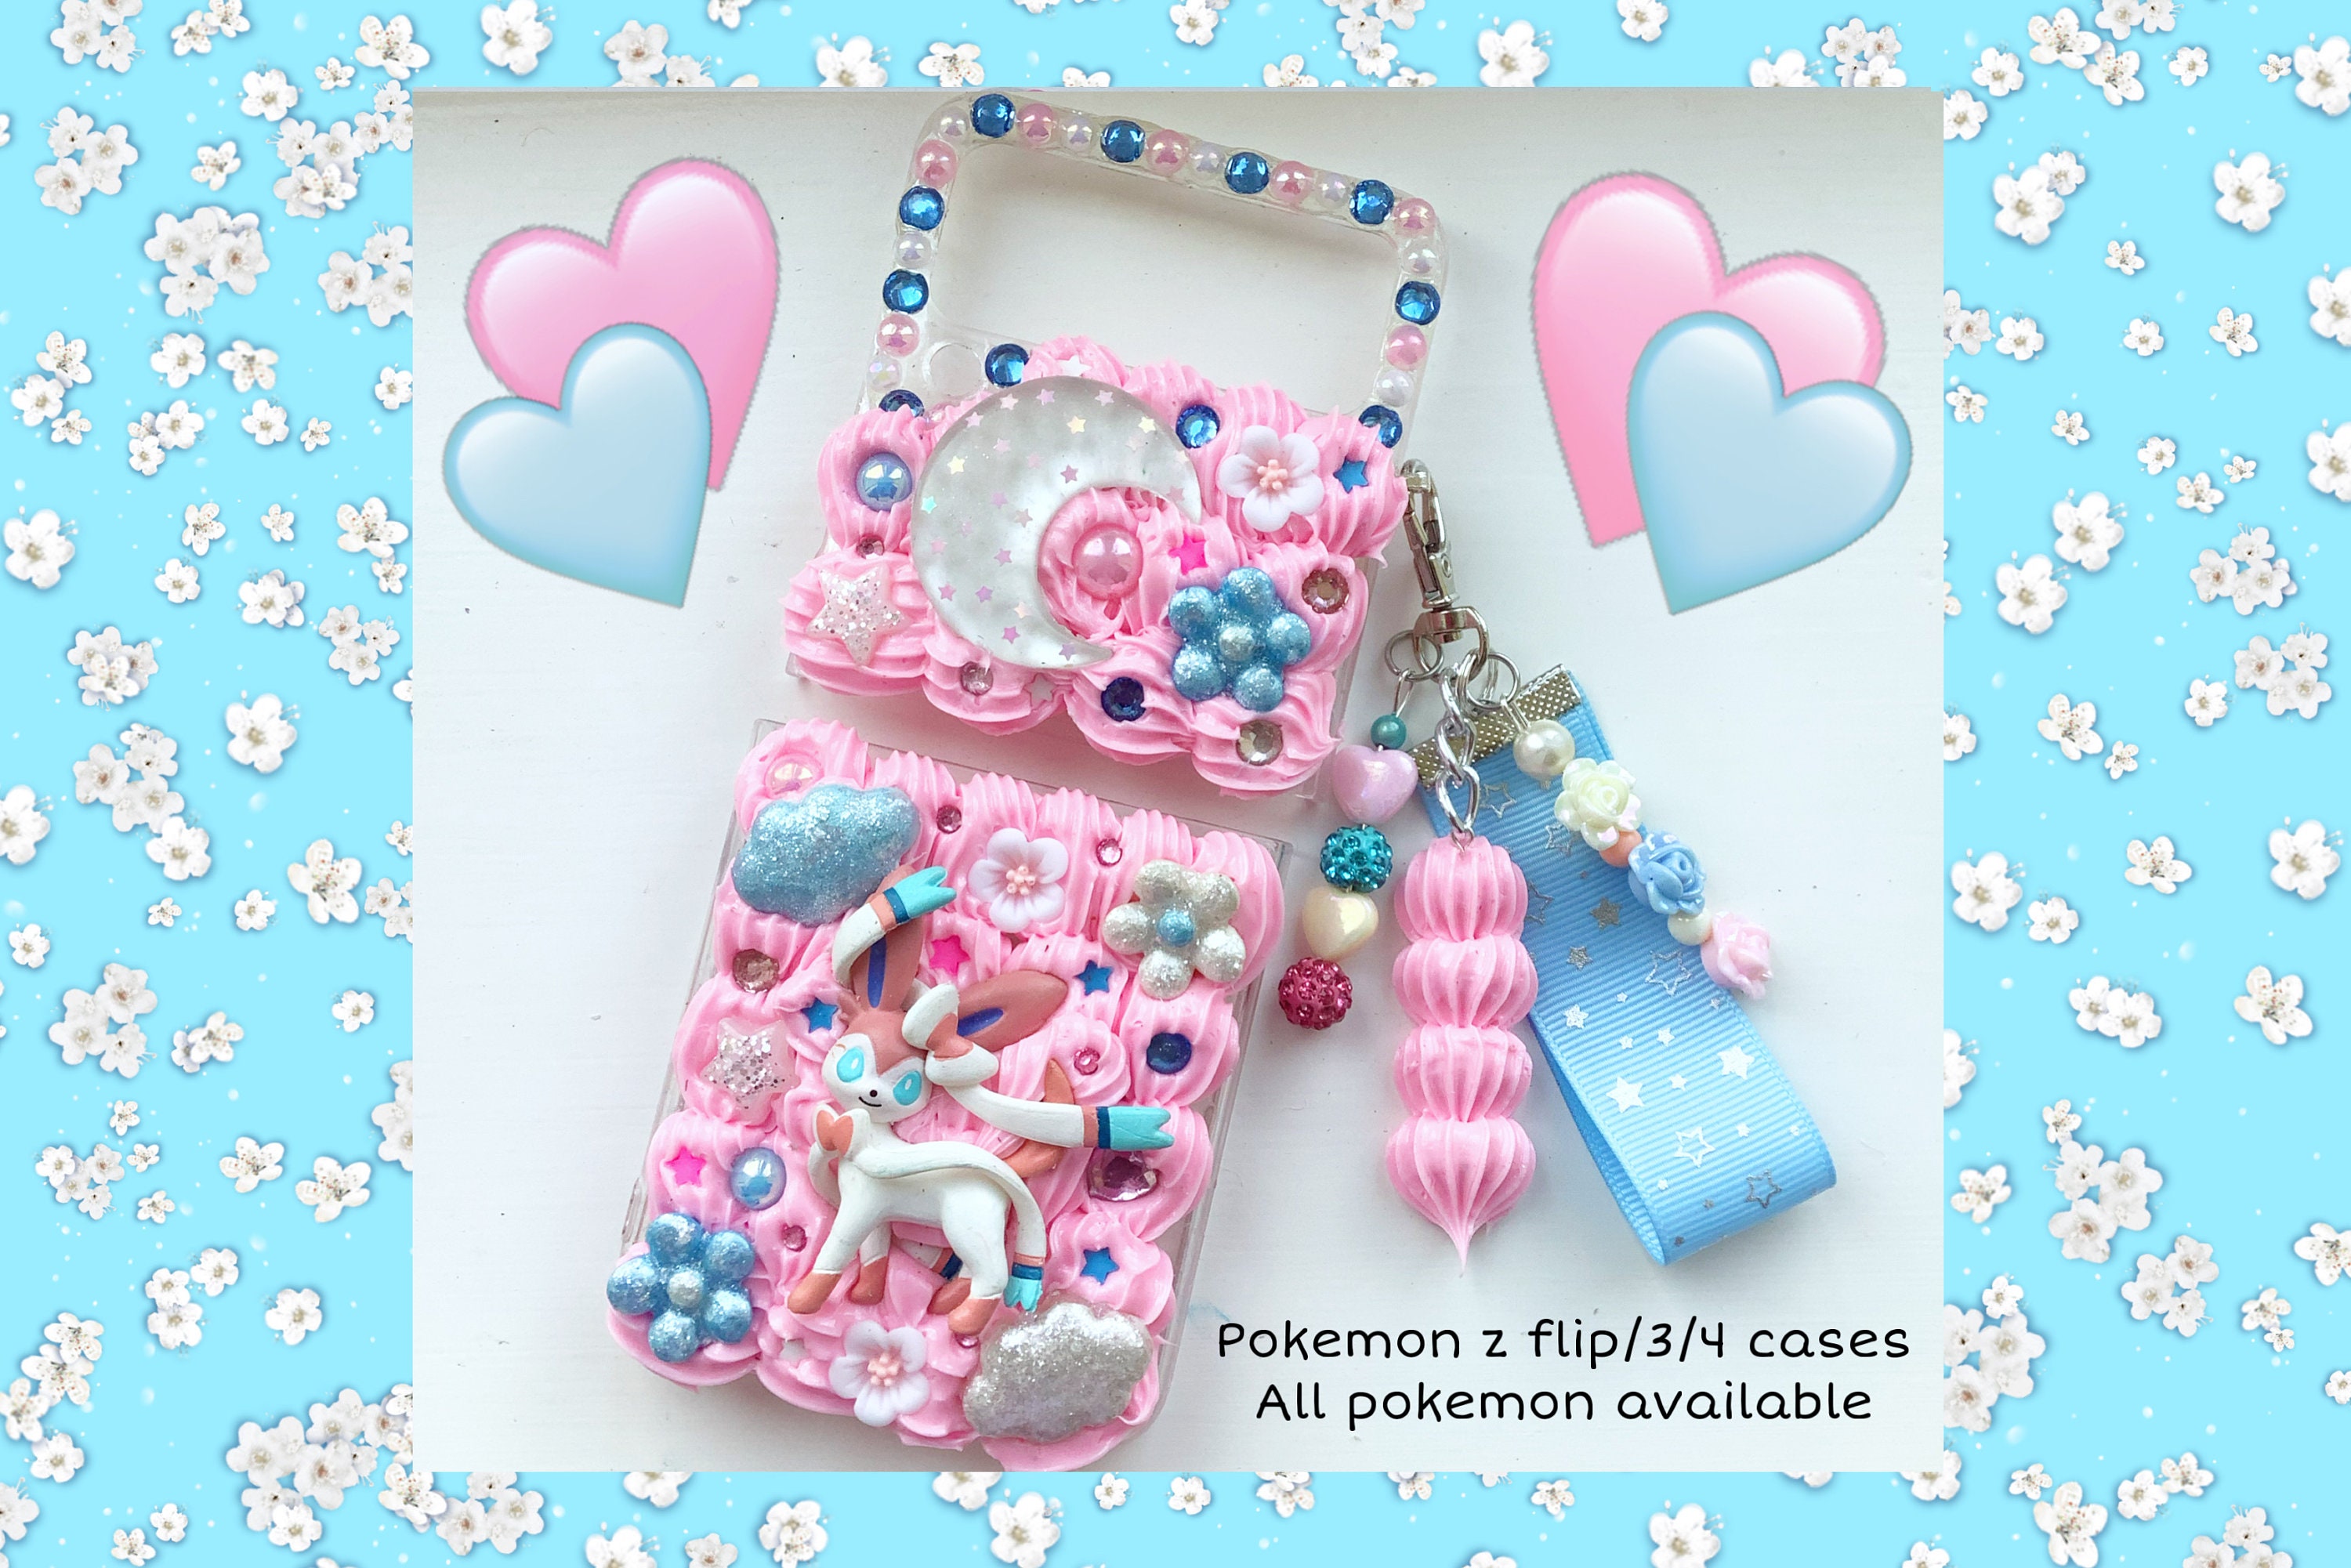 Some phone charms and flippy 5 cases. Ignore the sales blurbs as they're  from my selling page. : r/decoden